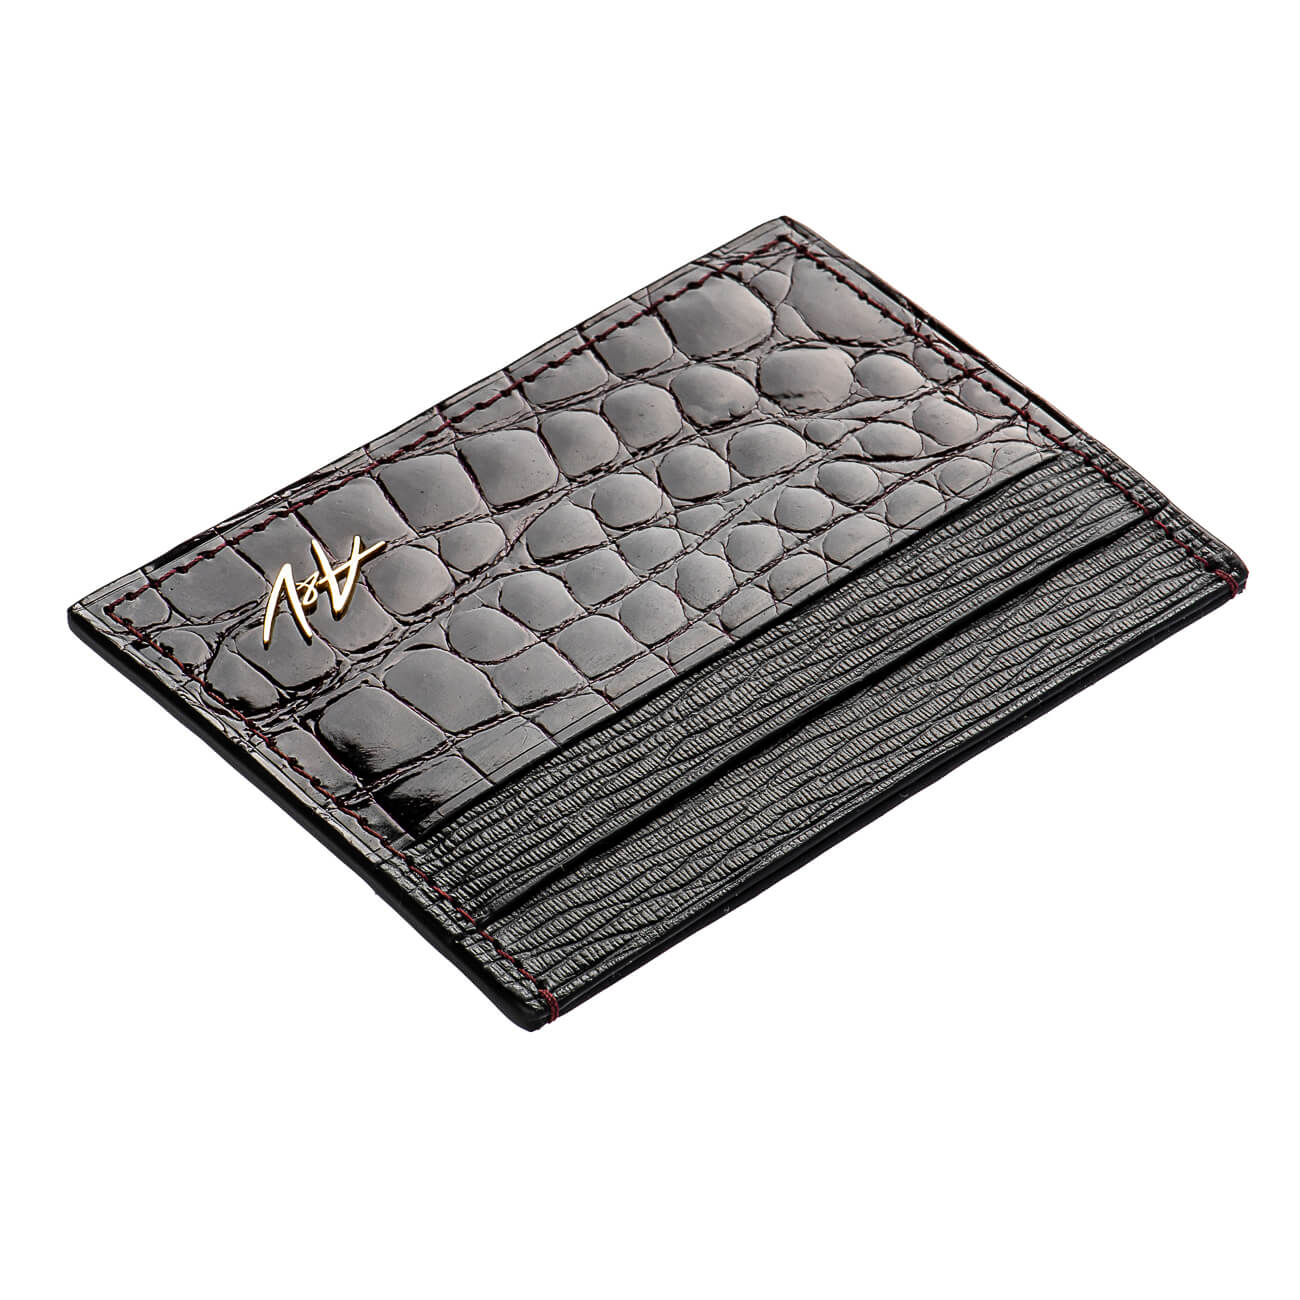 CARD HOLDER ALLIGATOR LACQUER CHERRY